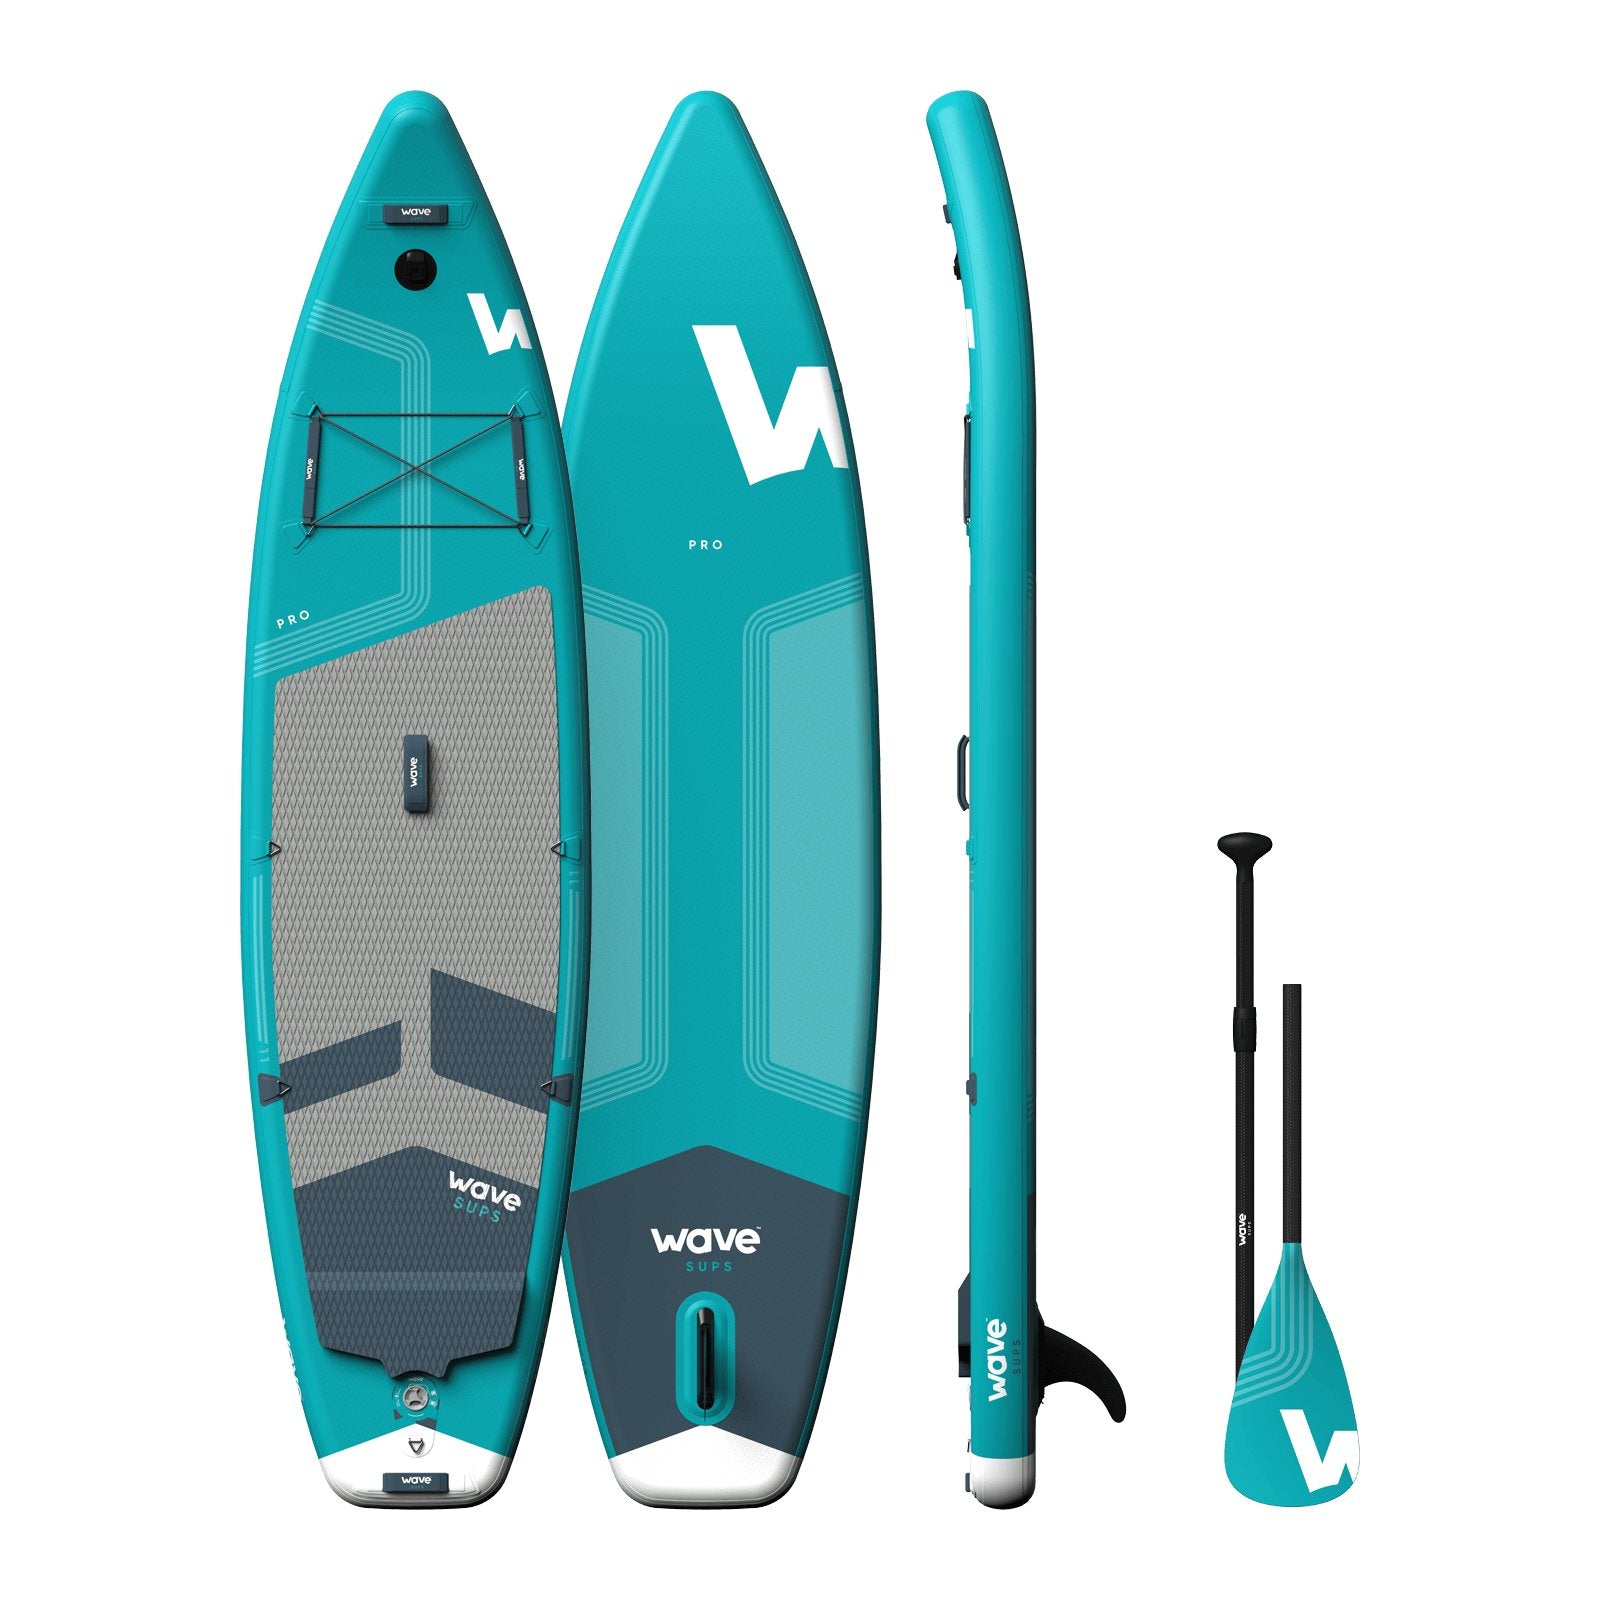 Pro 6 Teal-Purple Yoga Inflatable Stand-Up Paddle Board